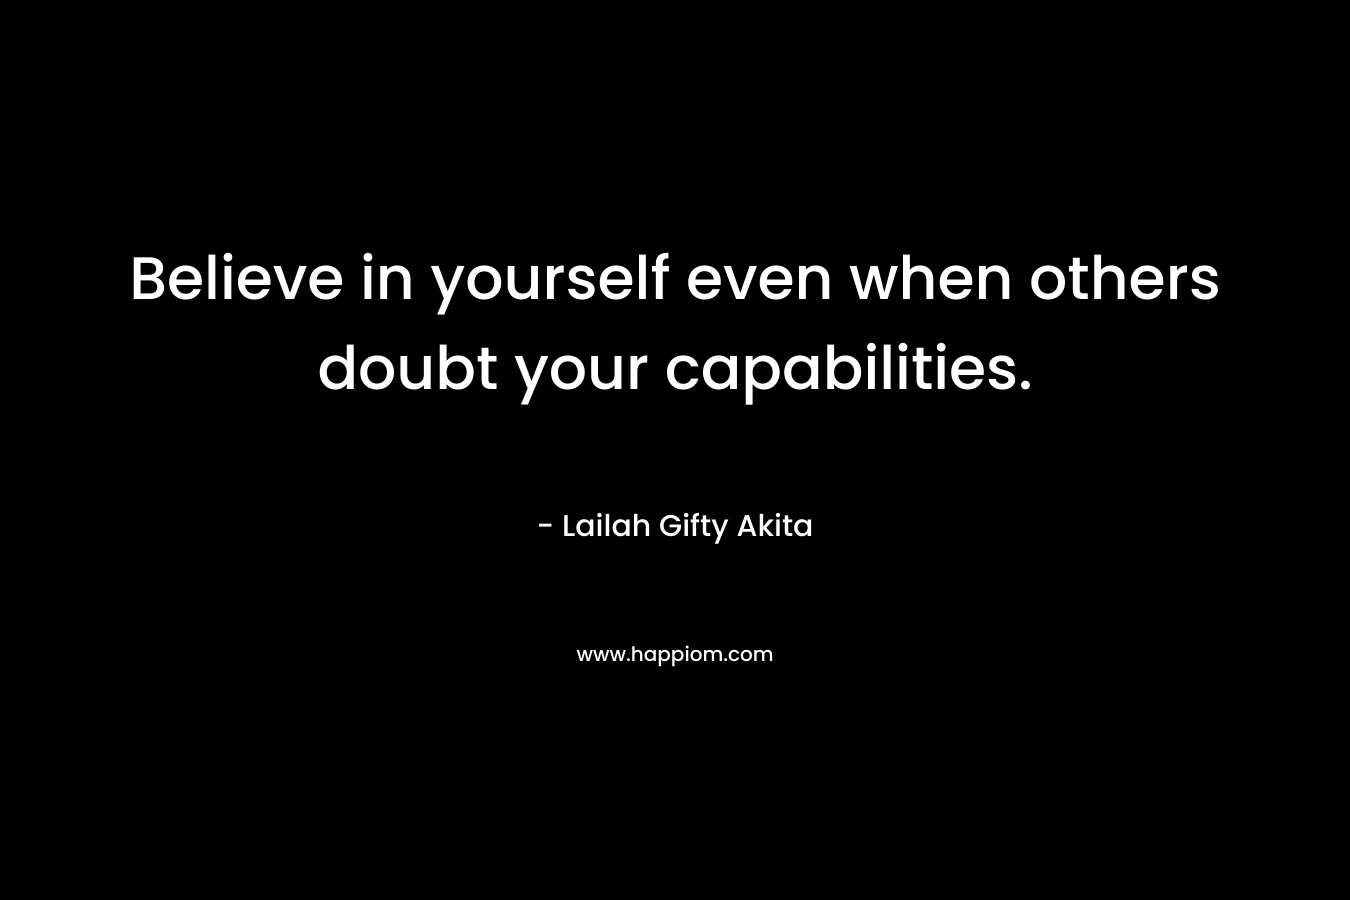 Believe in yourself even when others doubt your capabilities.